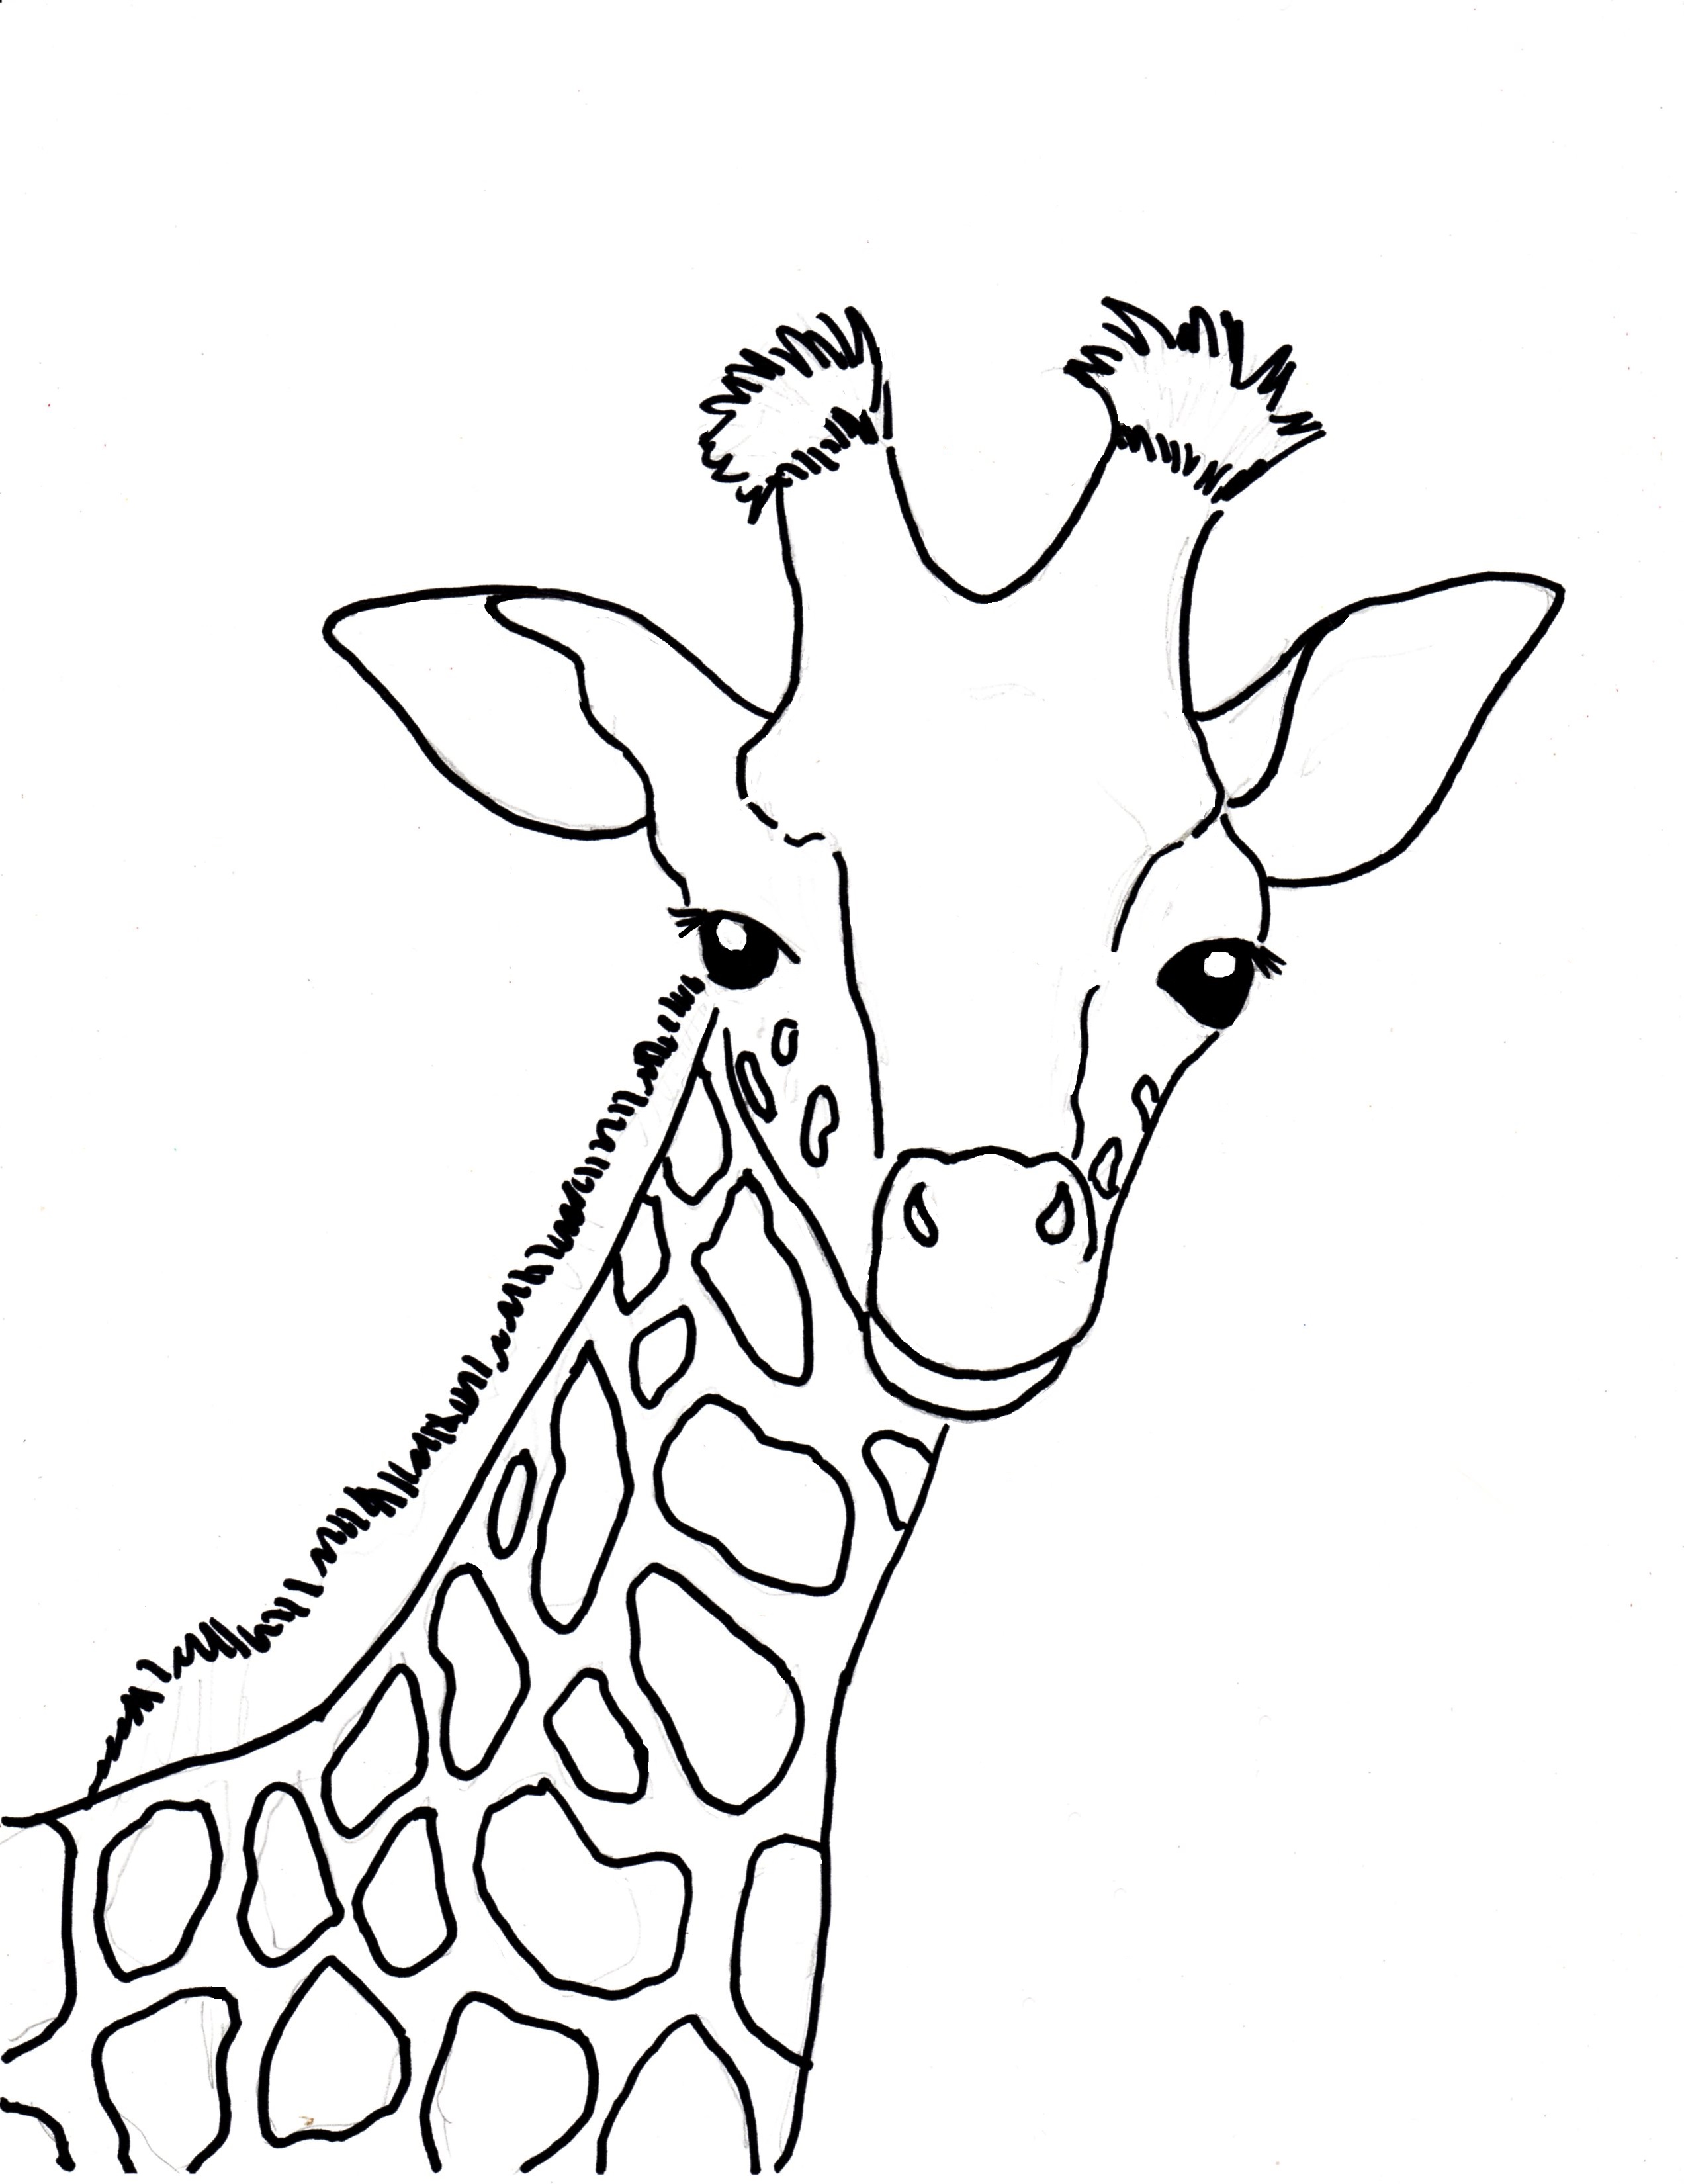 75 Cute Cute Giraffe Coloring Pages with Animal character